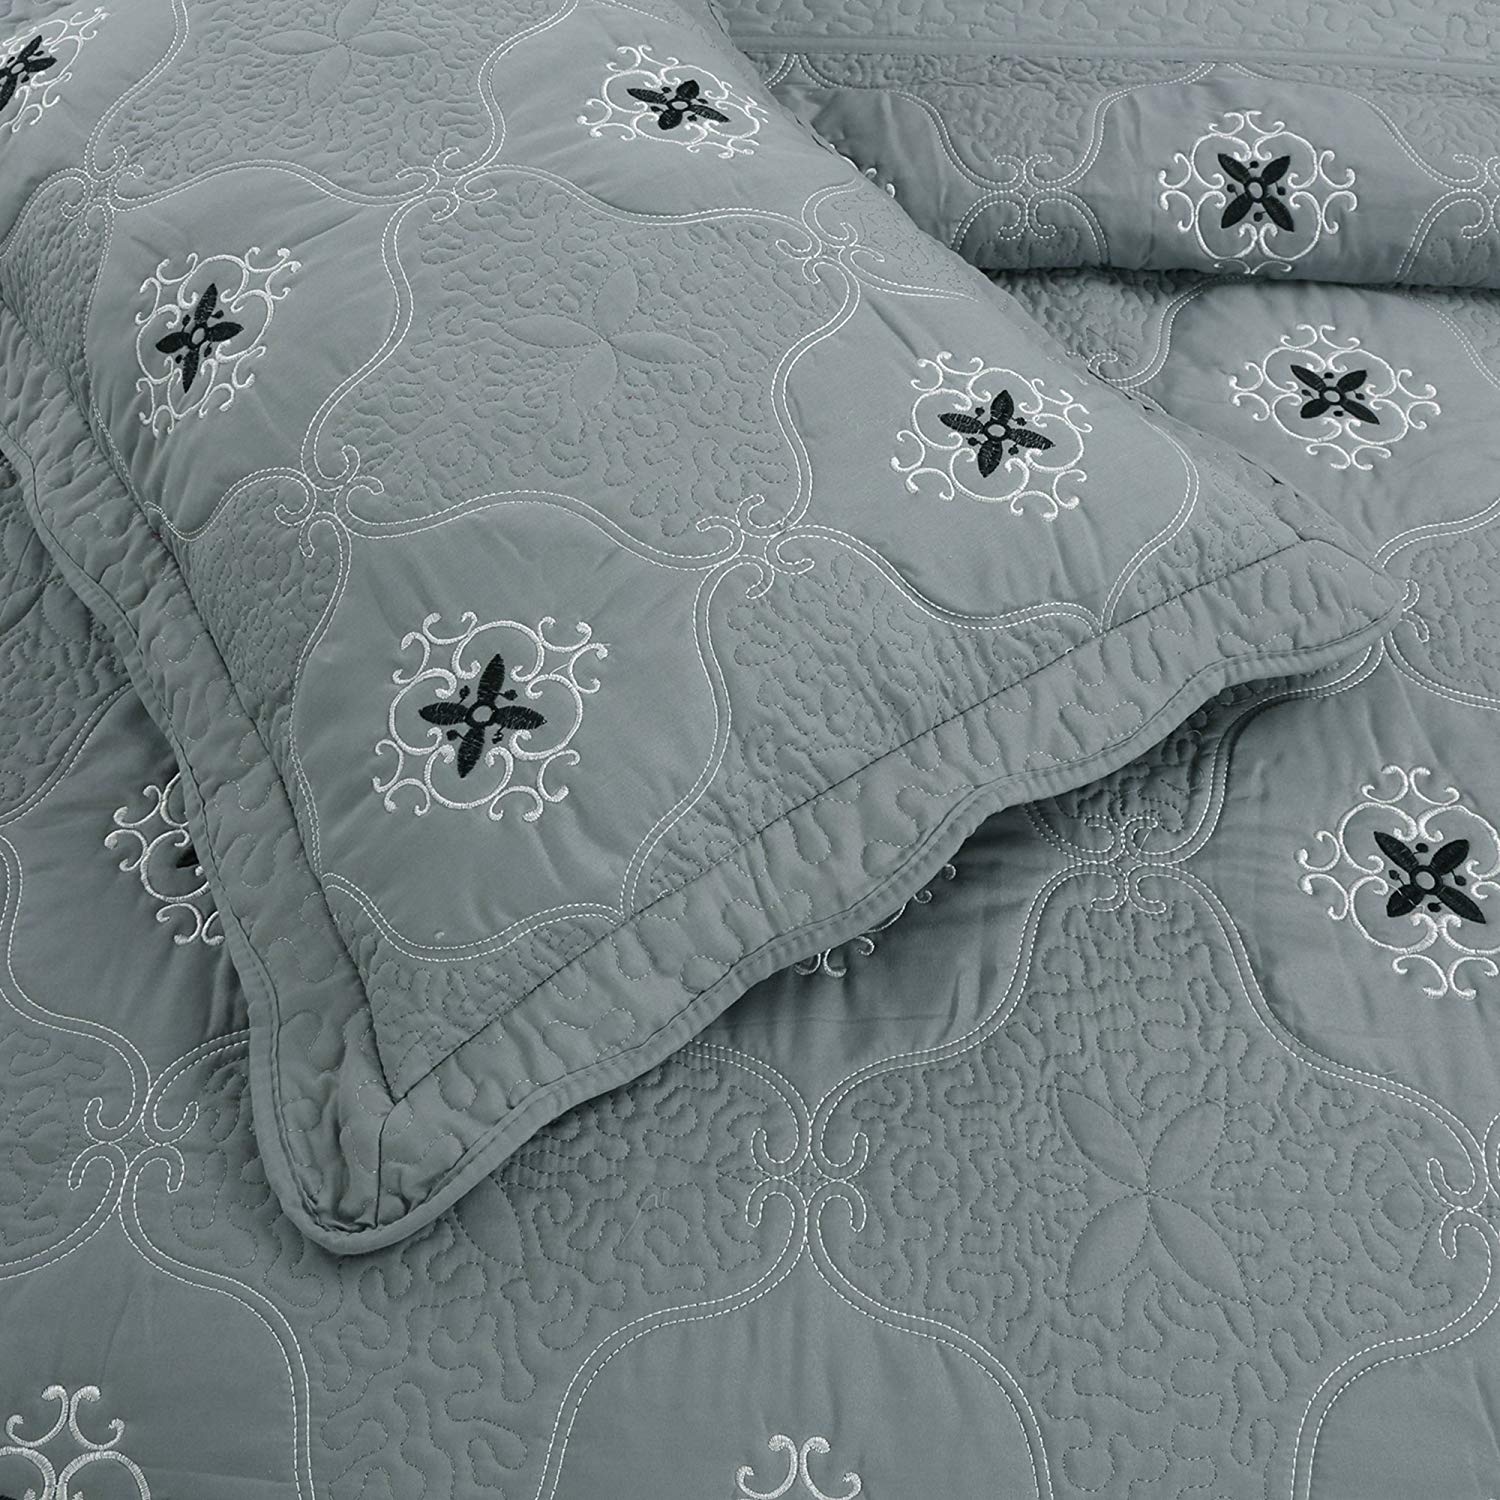 3-Piece Fully Quilted Embroidery Quilts Bedspreads Bed Coverlets Cover Set Emma